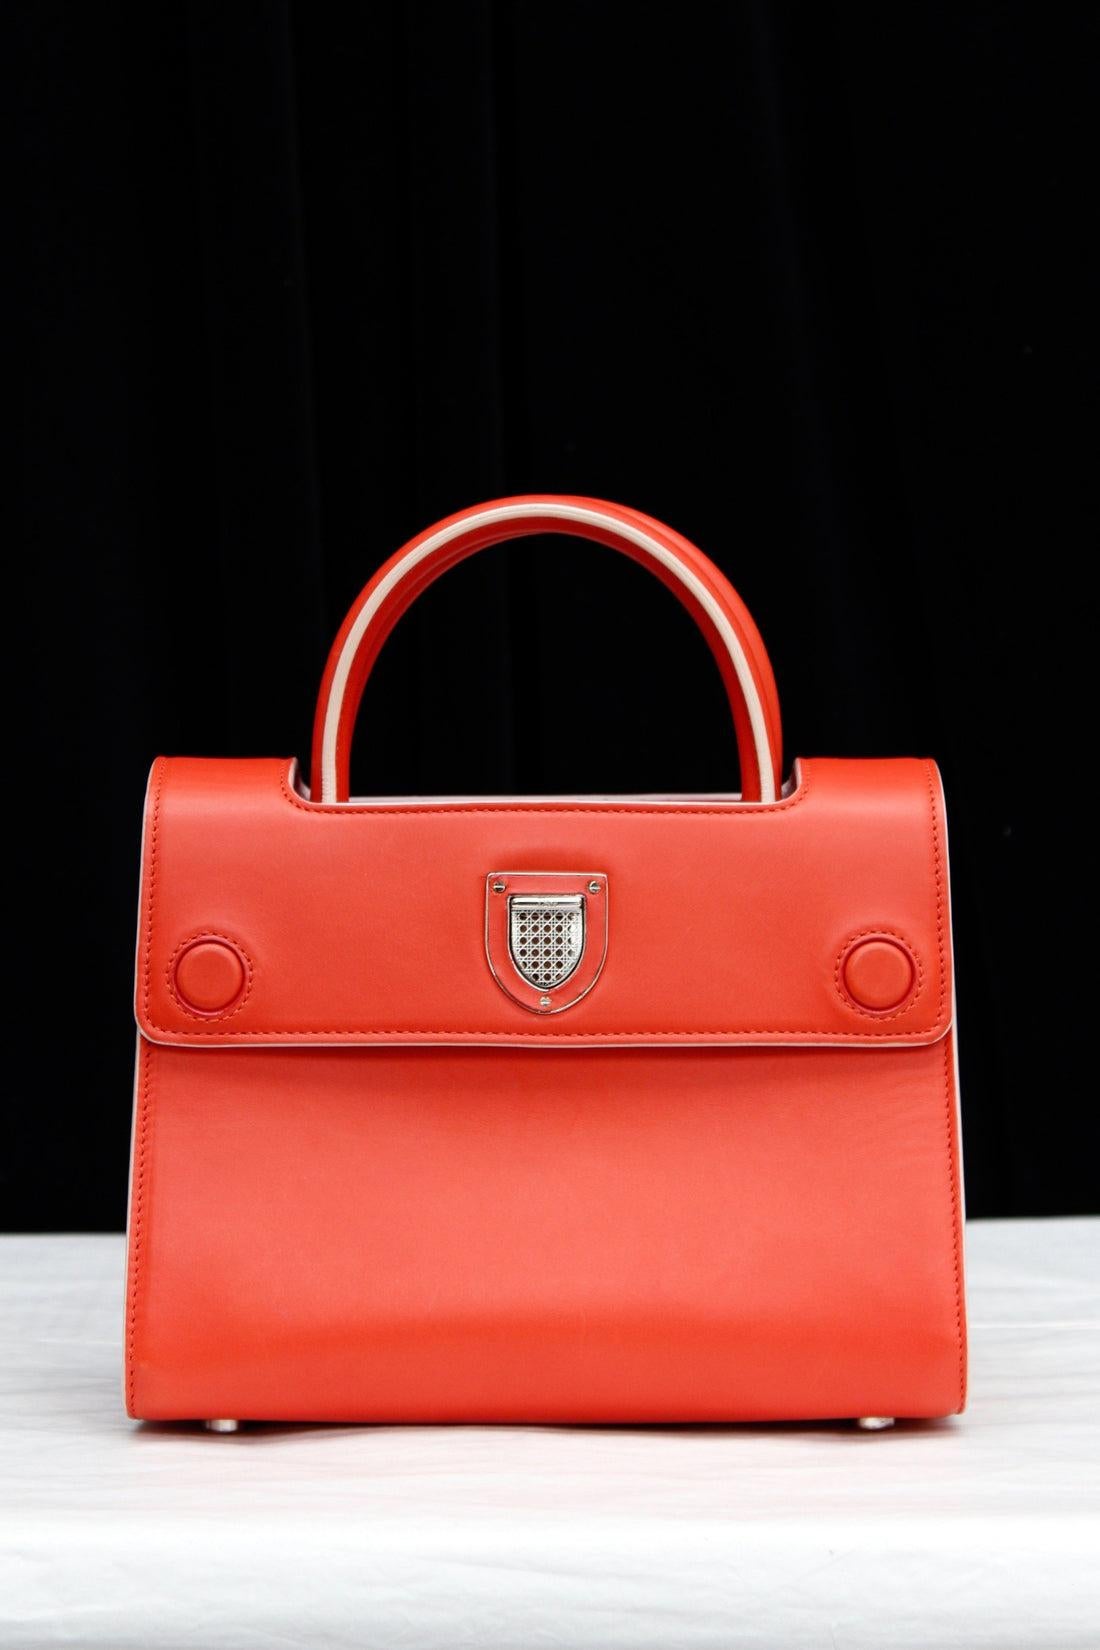 Red Dior Modern Leather Bag in Orange and White Leather